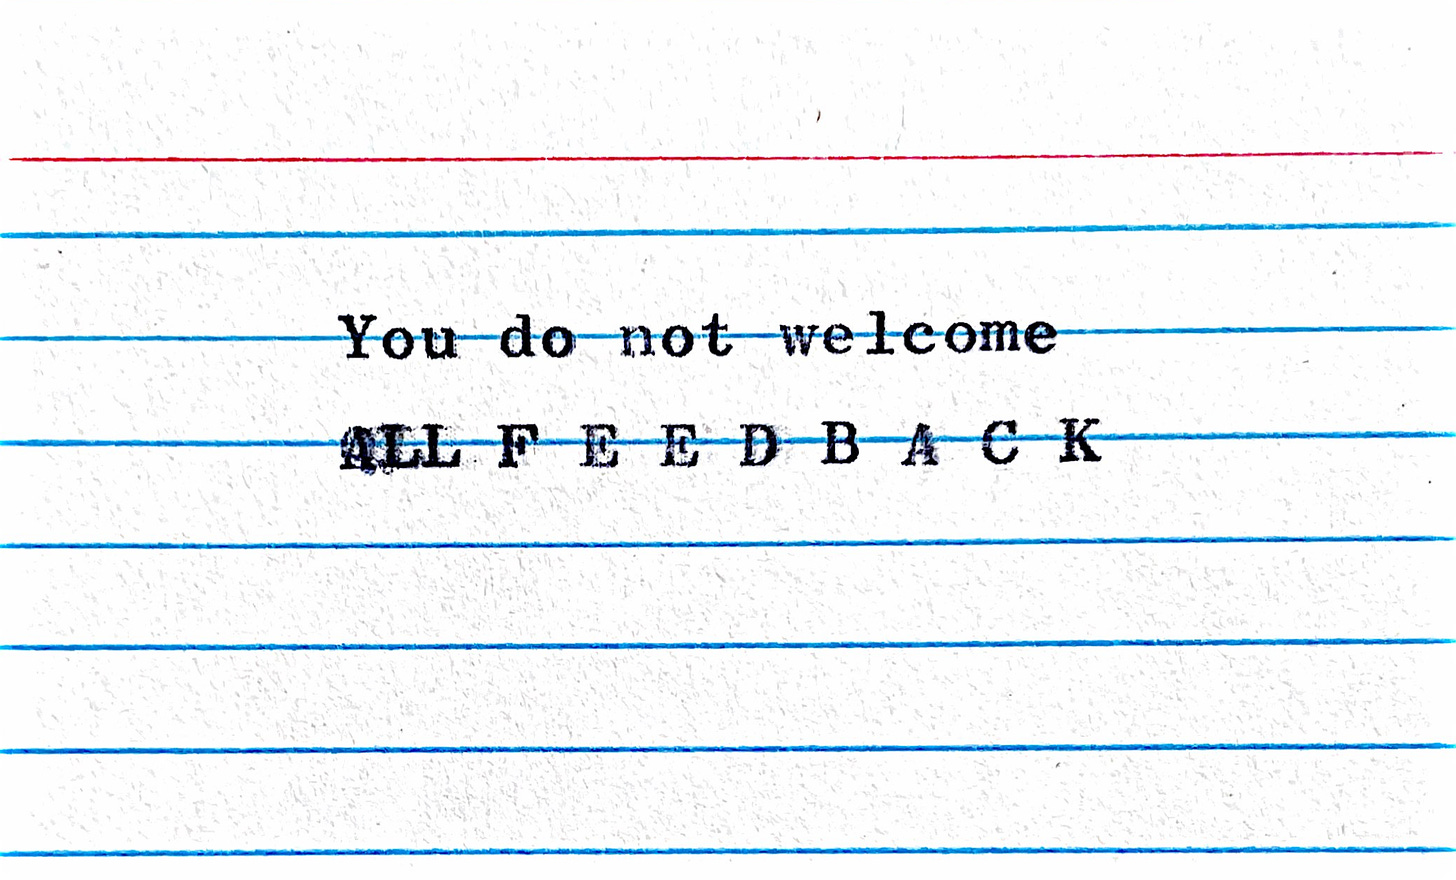 Postcard that says you do not welcome all feedback